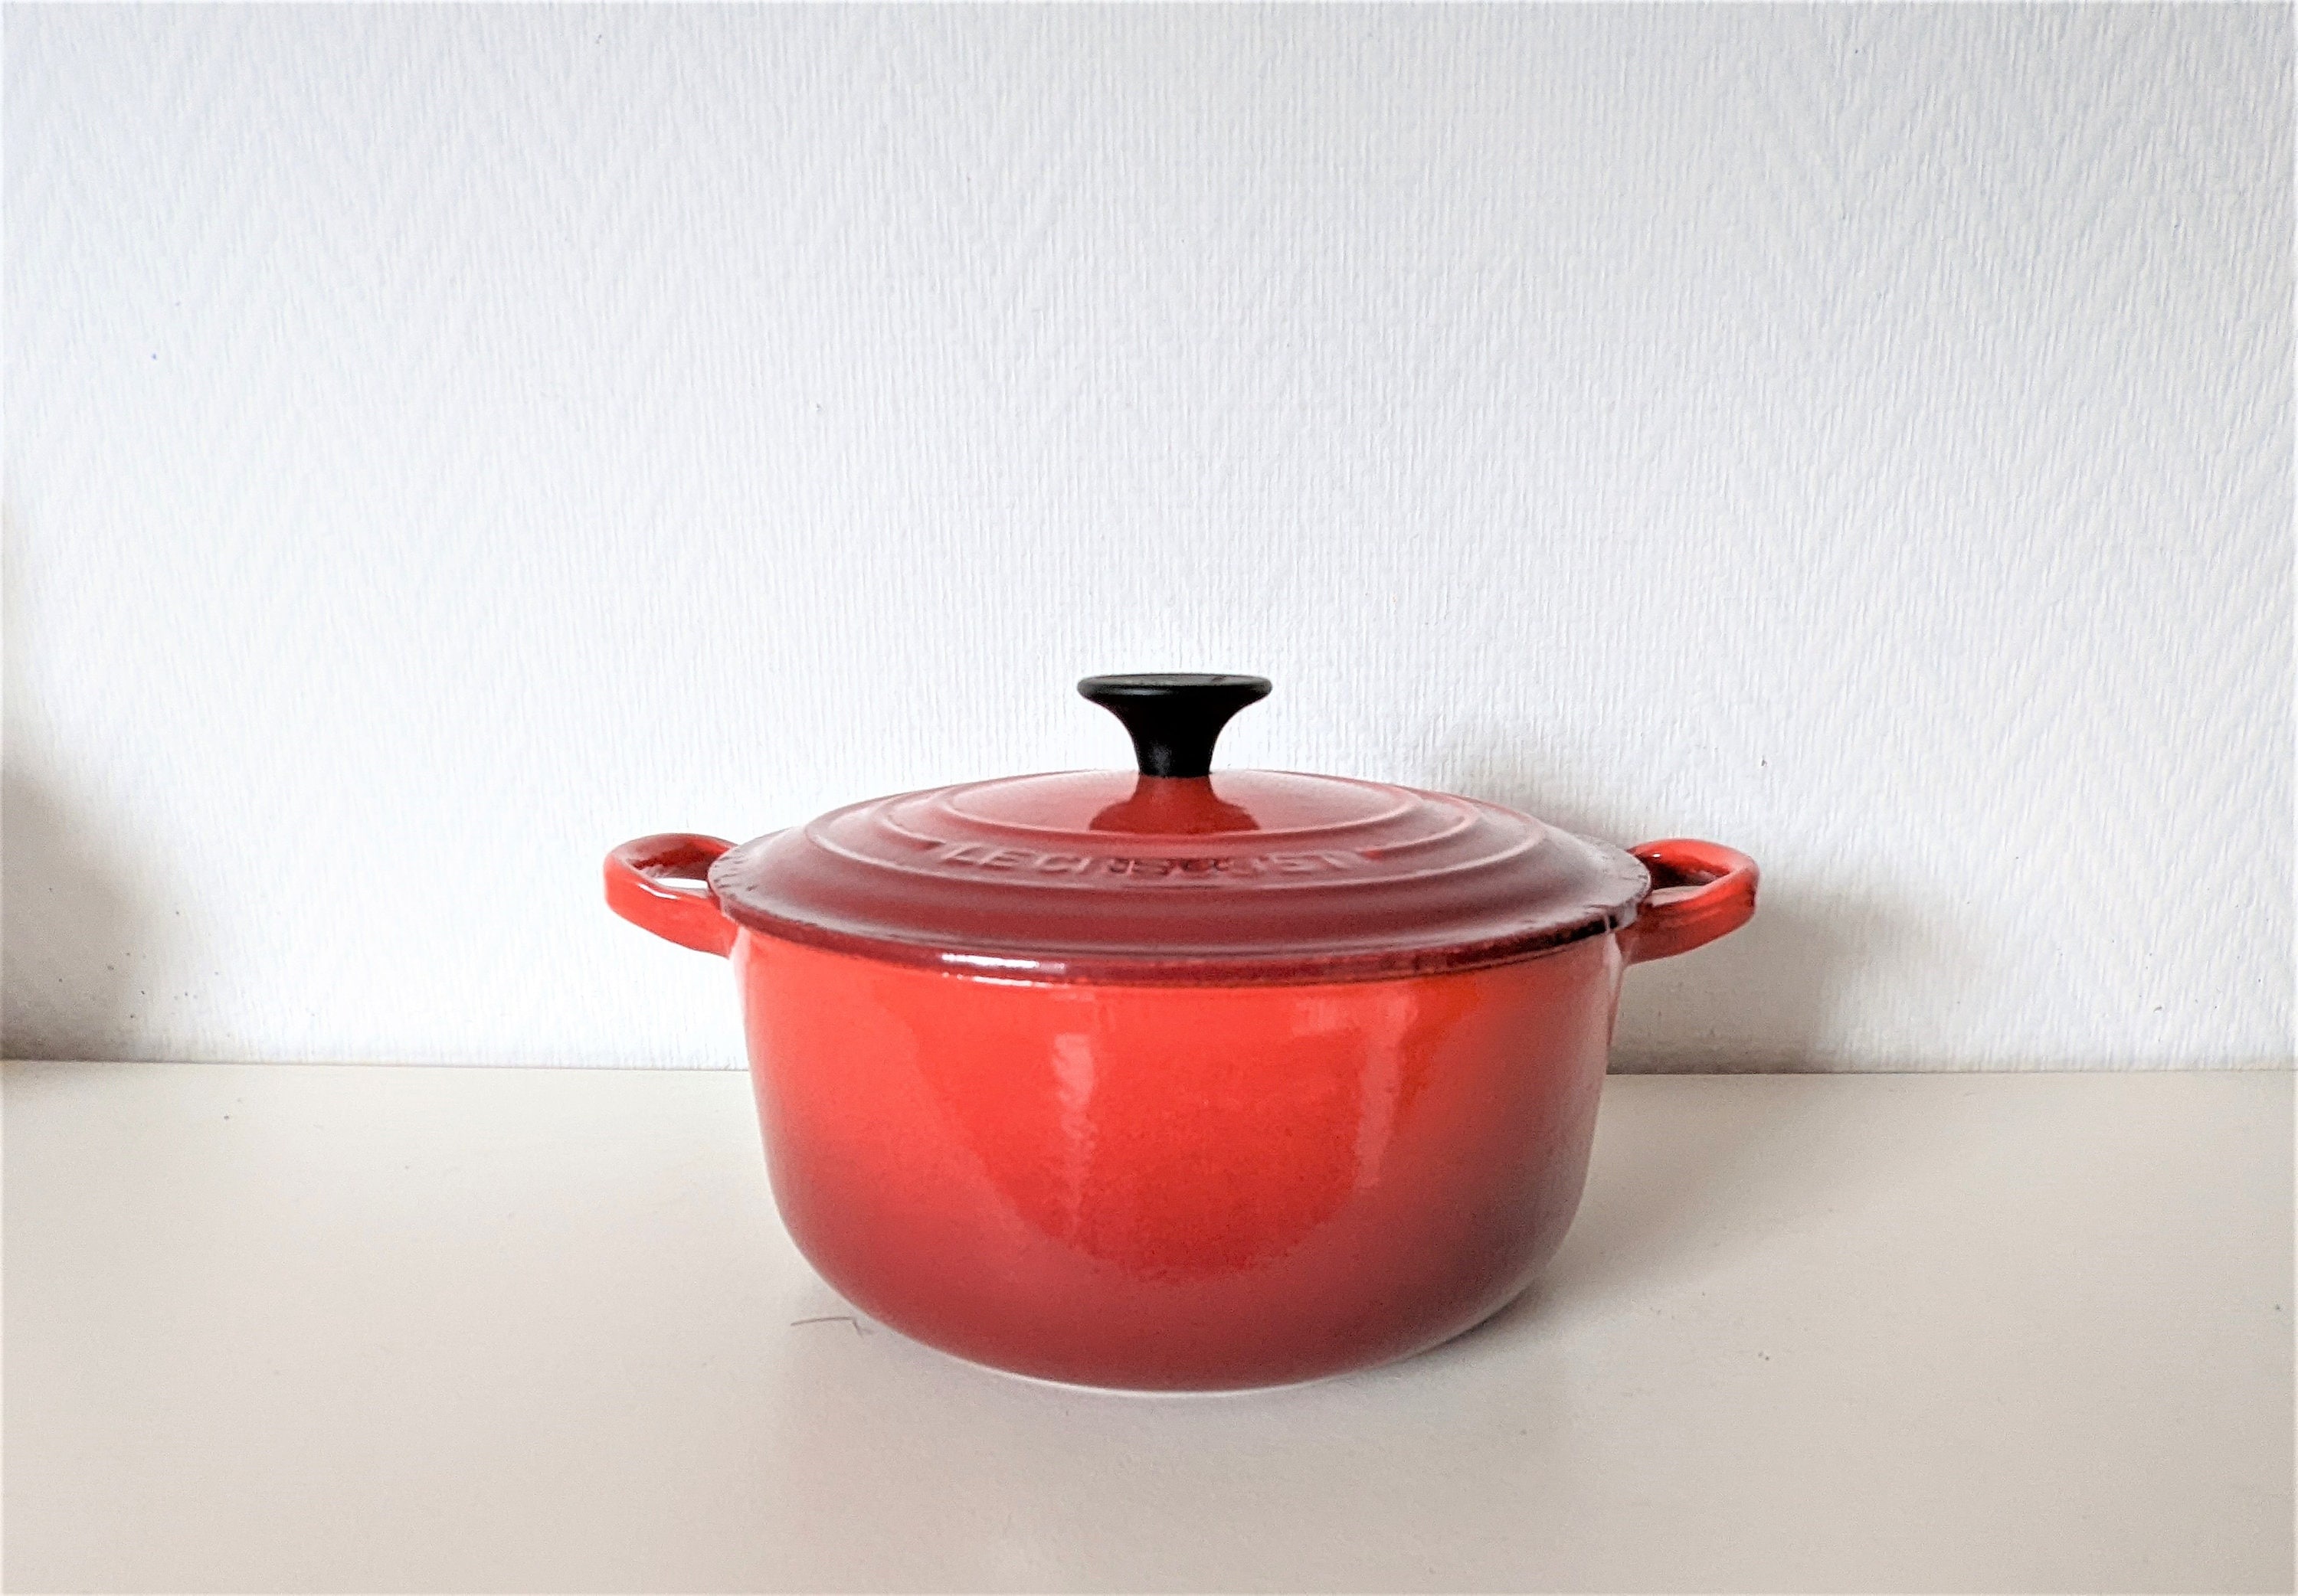 Timeless Beauty 7-Quart Dutch Oven with Bakelite Knob and